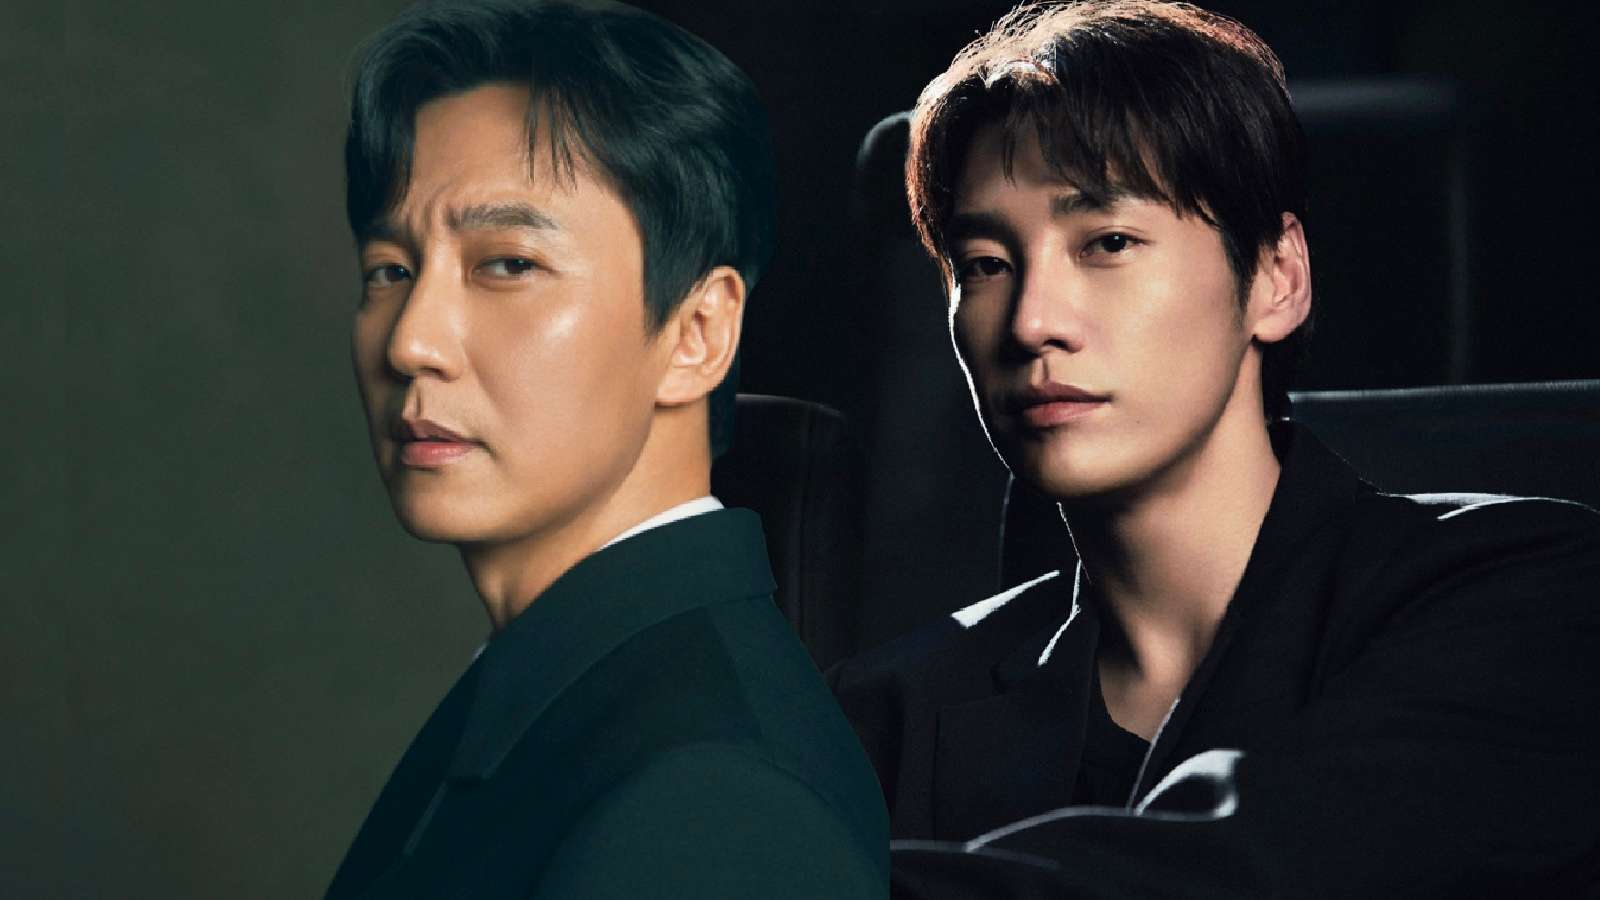 Kim Nam-gil and Kim Young-kwang will star in Trigger